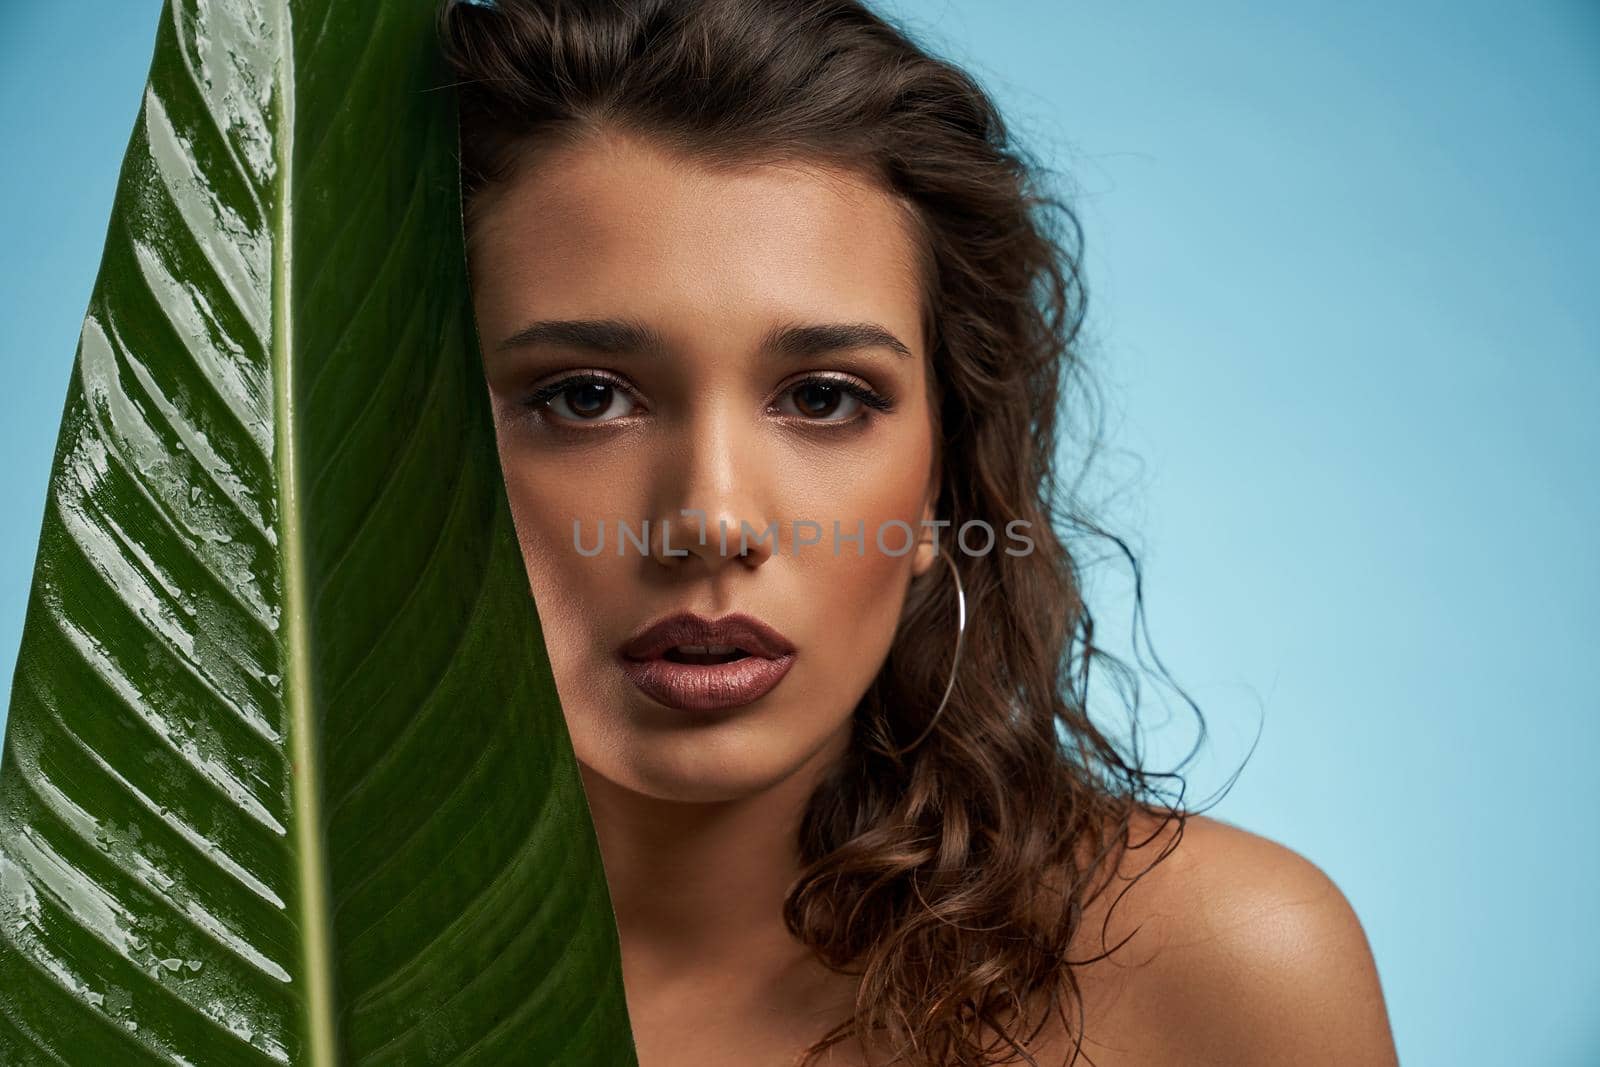 Close up portrait of astinishing naked female model looking at camera. Crop of young brunette woman with perfect makeup and fresh skin posing with mouth open, holding big green leaf. Beauty concept.